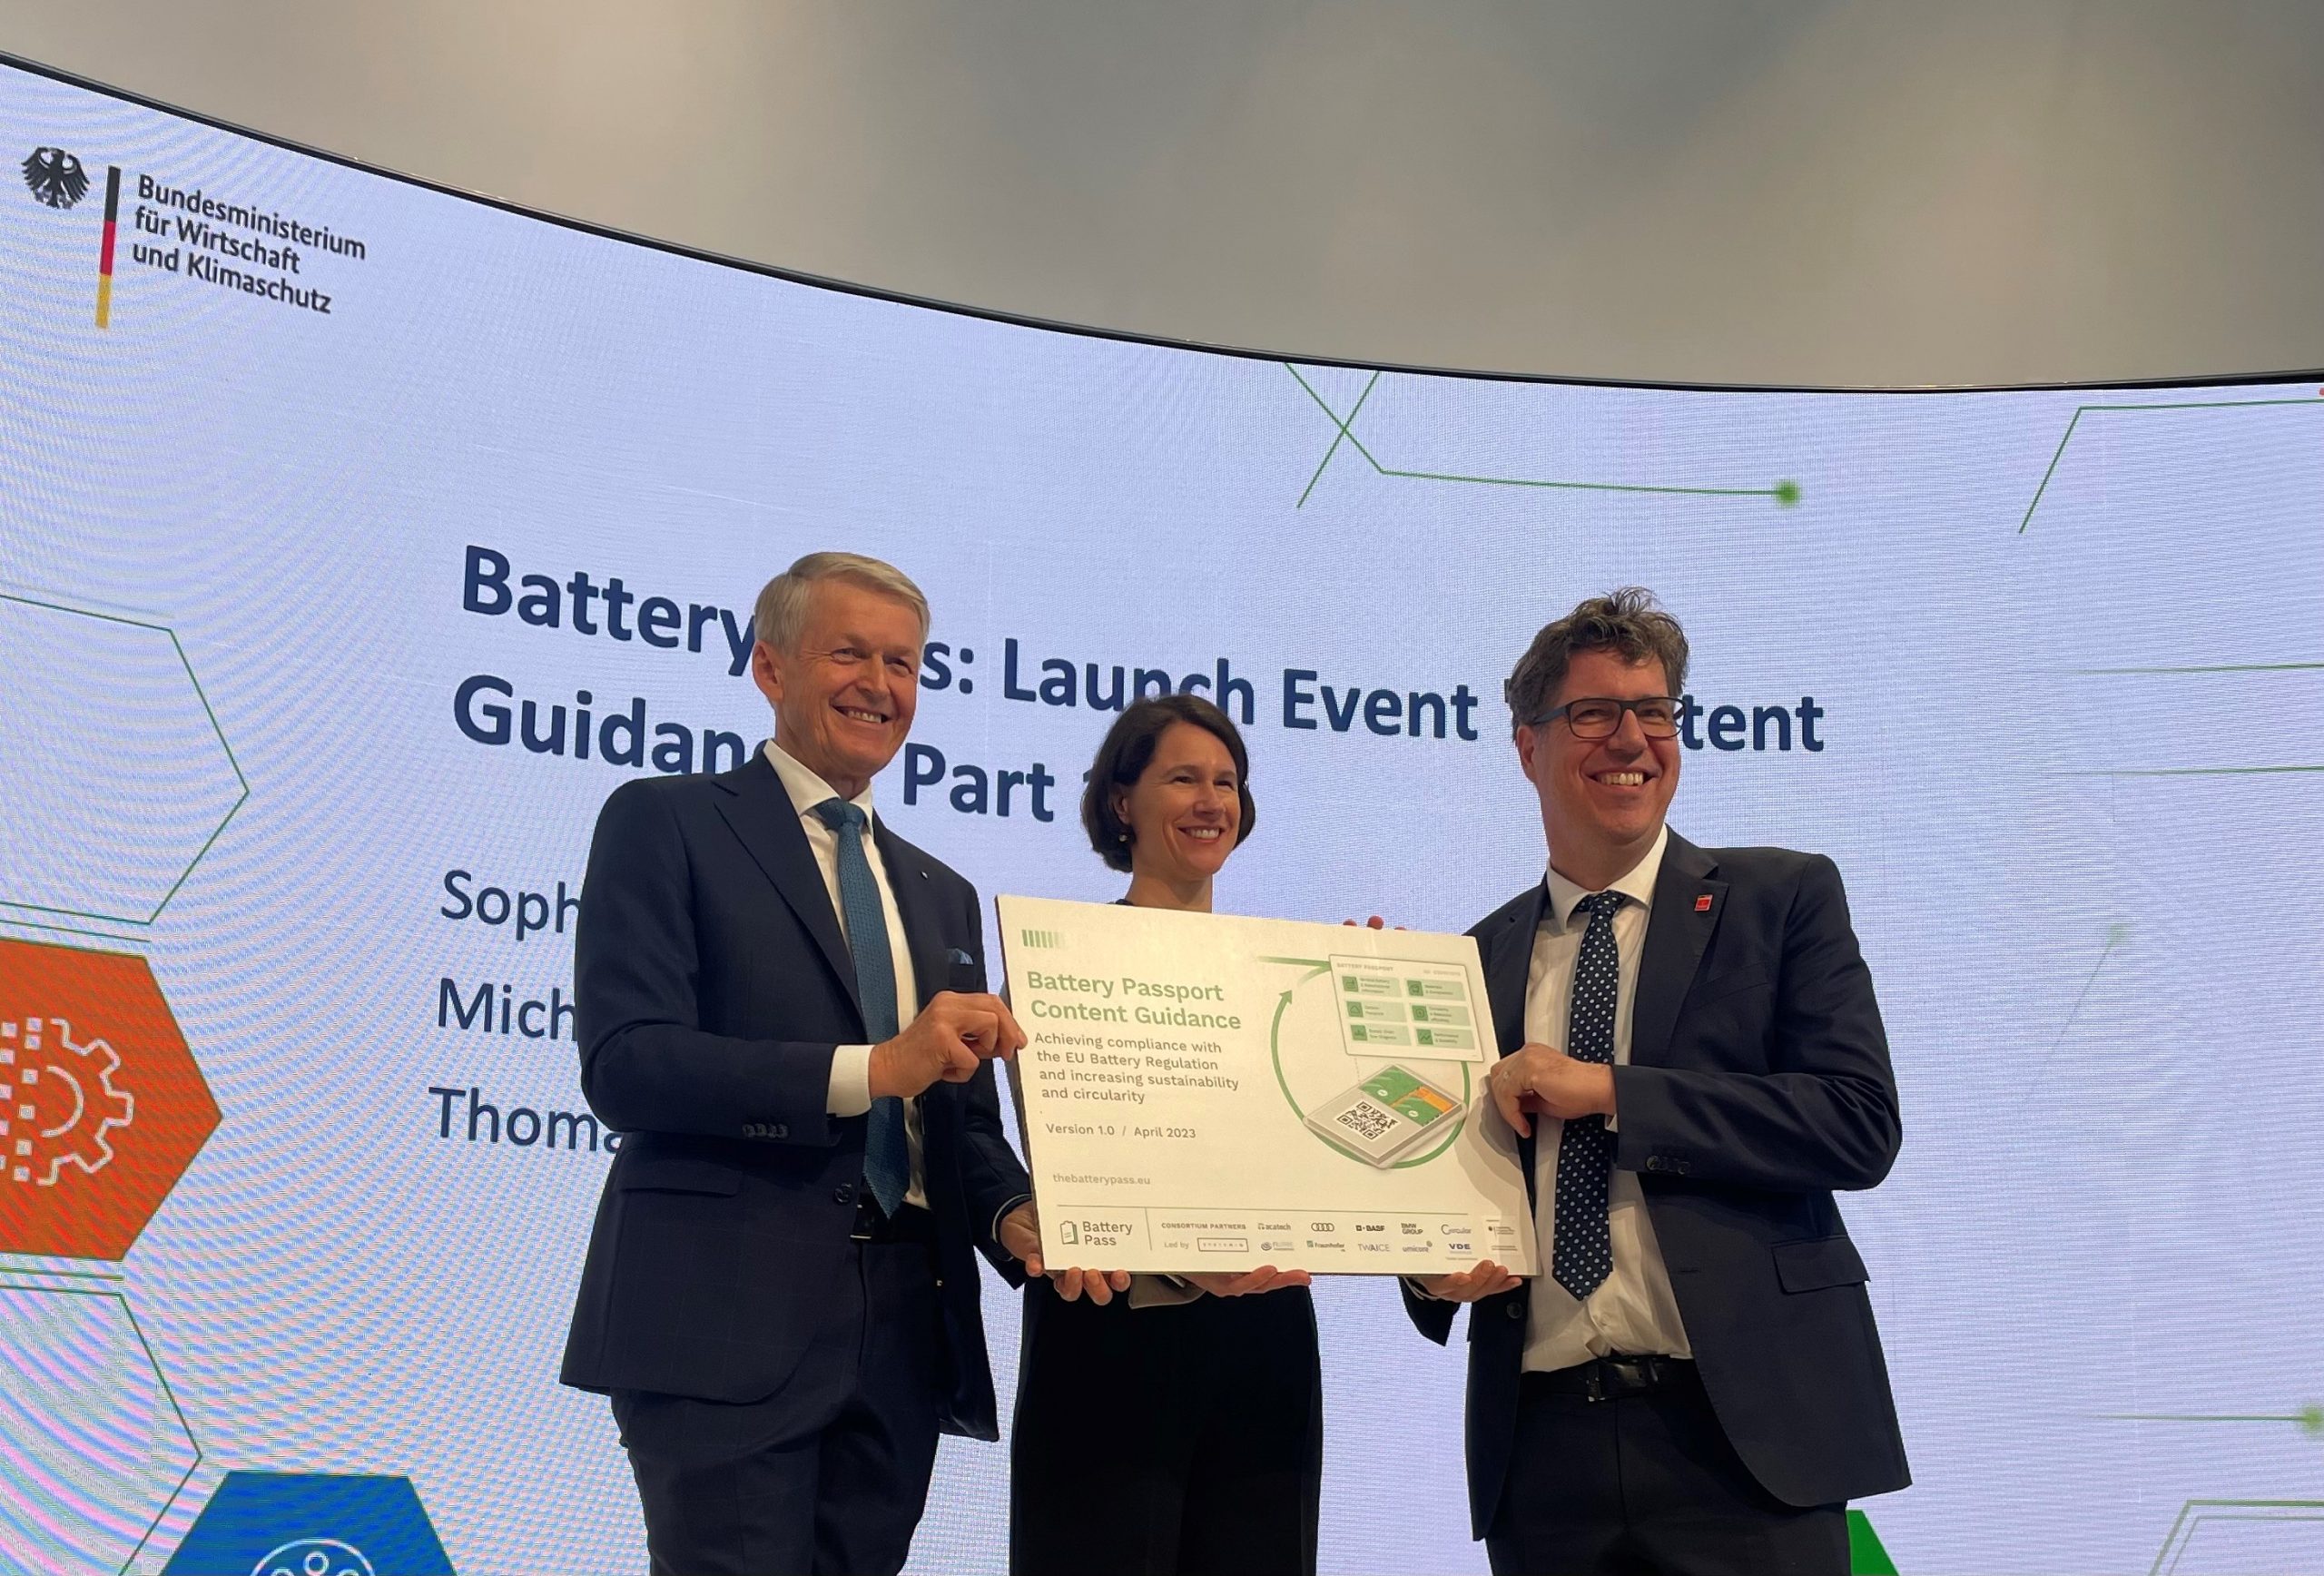 From left to right: Prof. Dr.-Ing. Thomas Weber, President, acatech – National Academy of Science and Engineering; Sophie Herrmann, Partner, Systemiq GmbH and Program Director, Battery Pass Consortium; Michael Kellner, Parliamentary State Secretary of the Federal Ministry for Economic Affairs and Climate Action (BMWK).